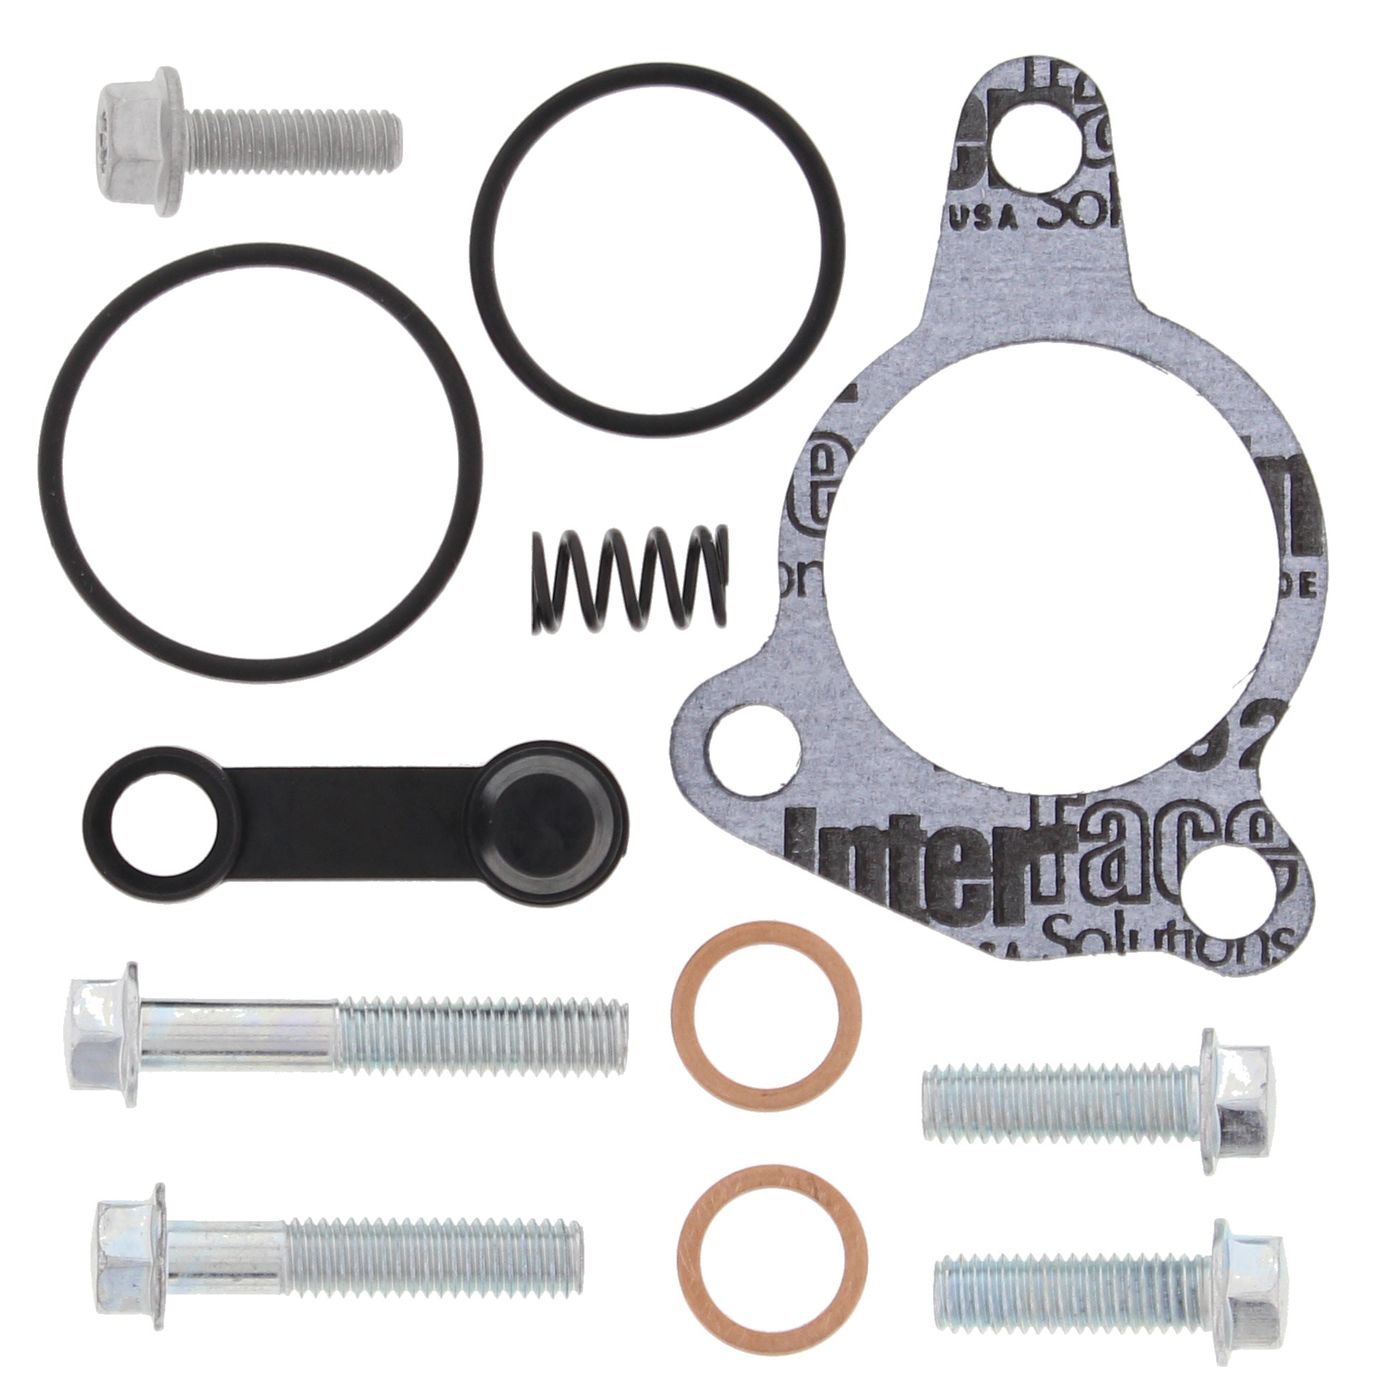 Wrp Clutch Slave Cylinder Kits - WRP186005 image